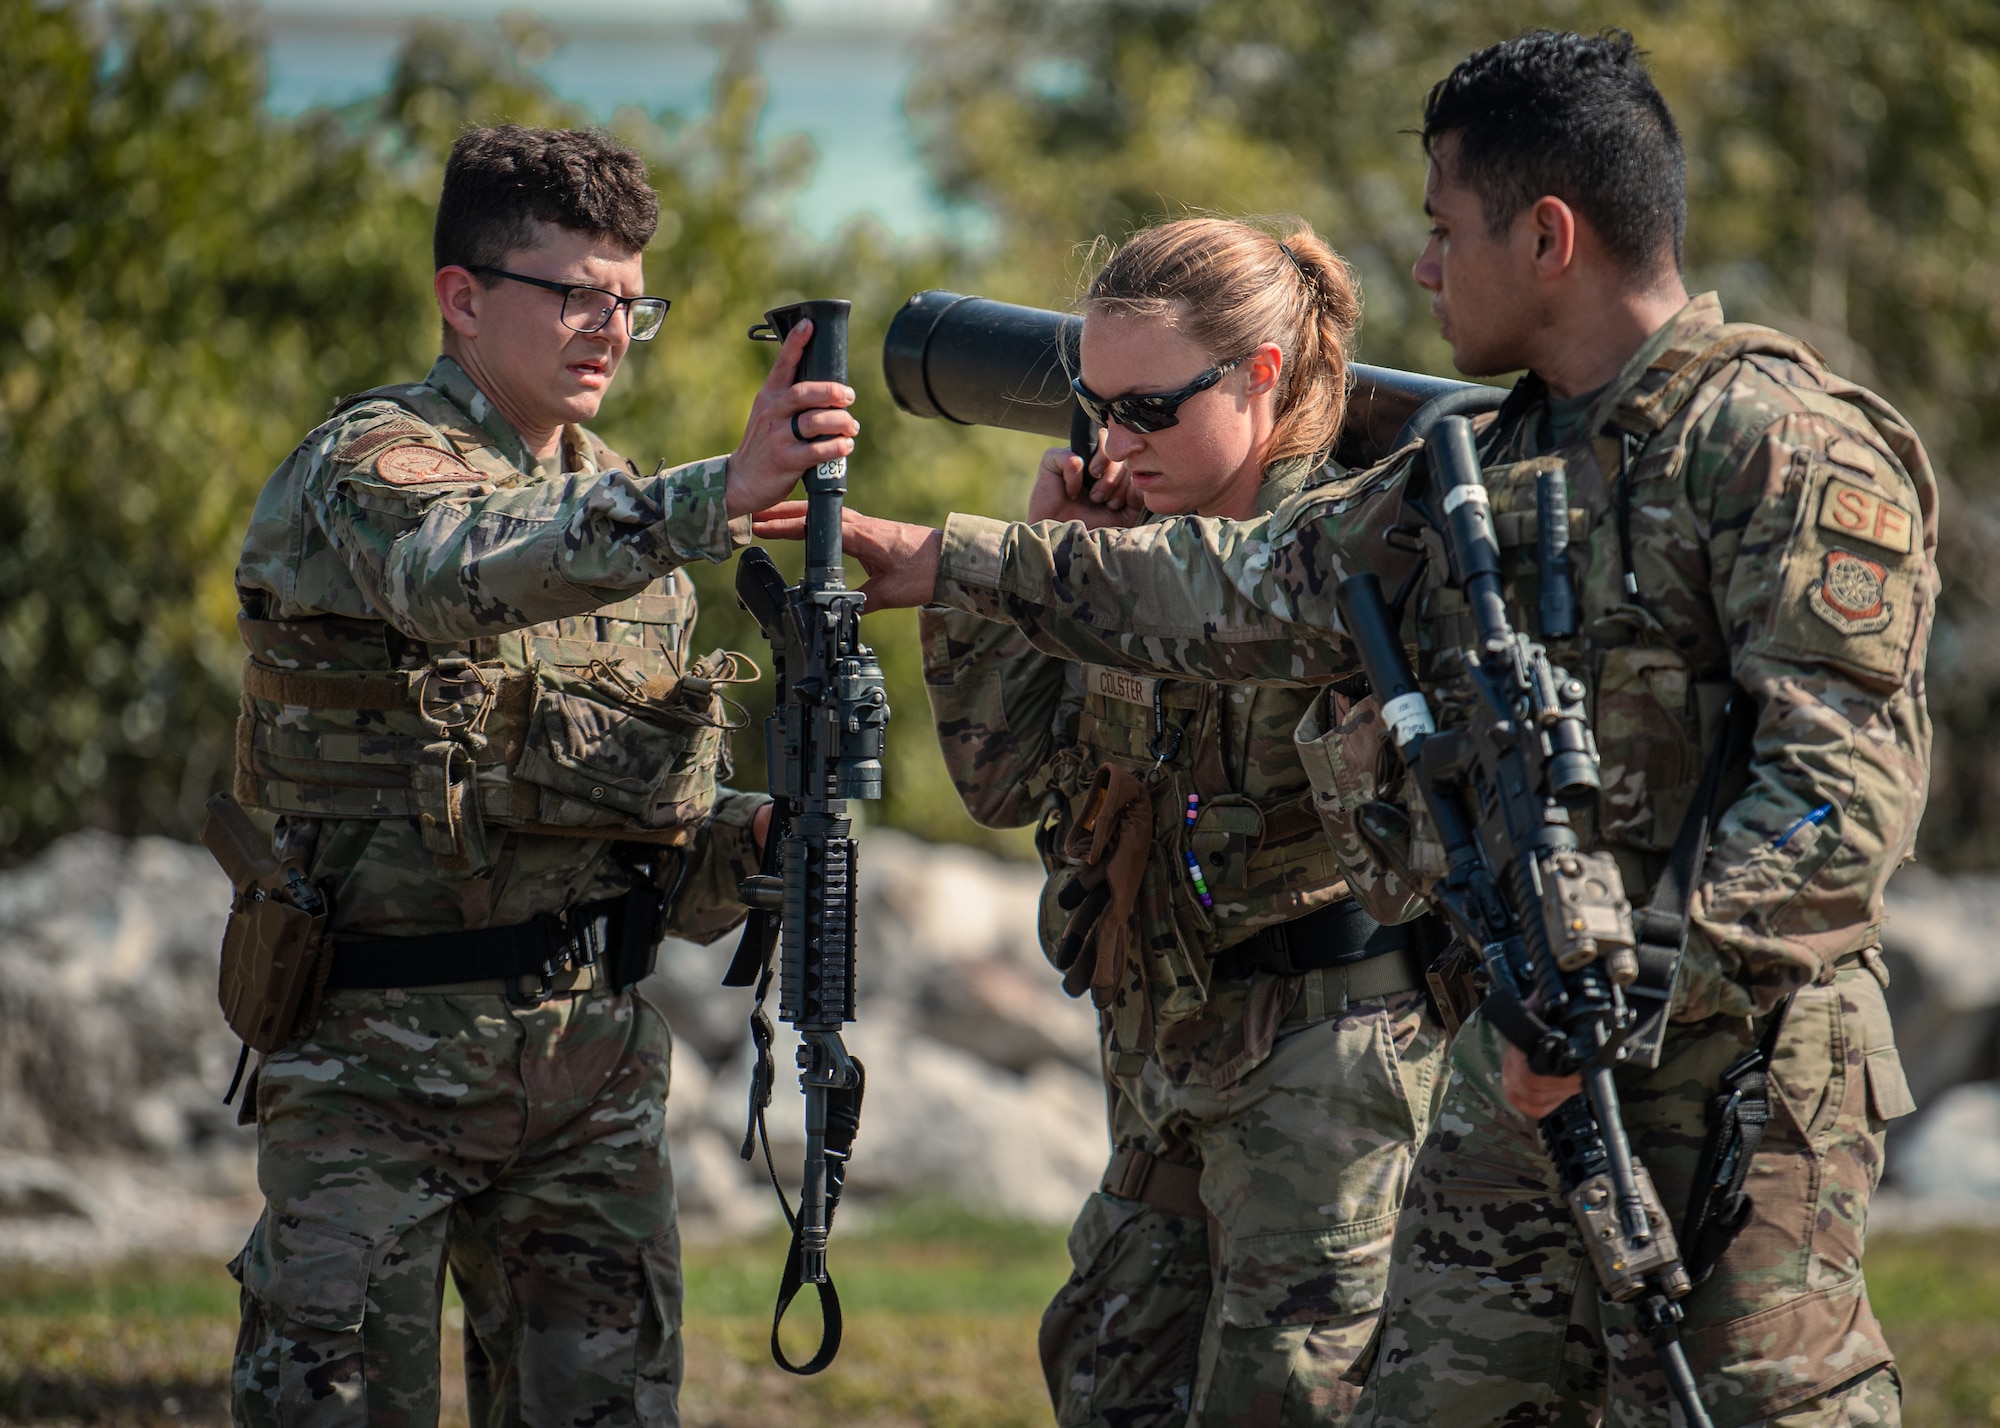 Airmen from the 6th Security Forces Squadron complete a drill exercise during Emergency Services Team tryouts at MacDill Air Force Base, Florida, Feb. 4, 2022.